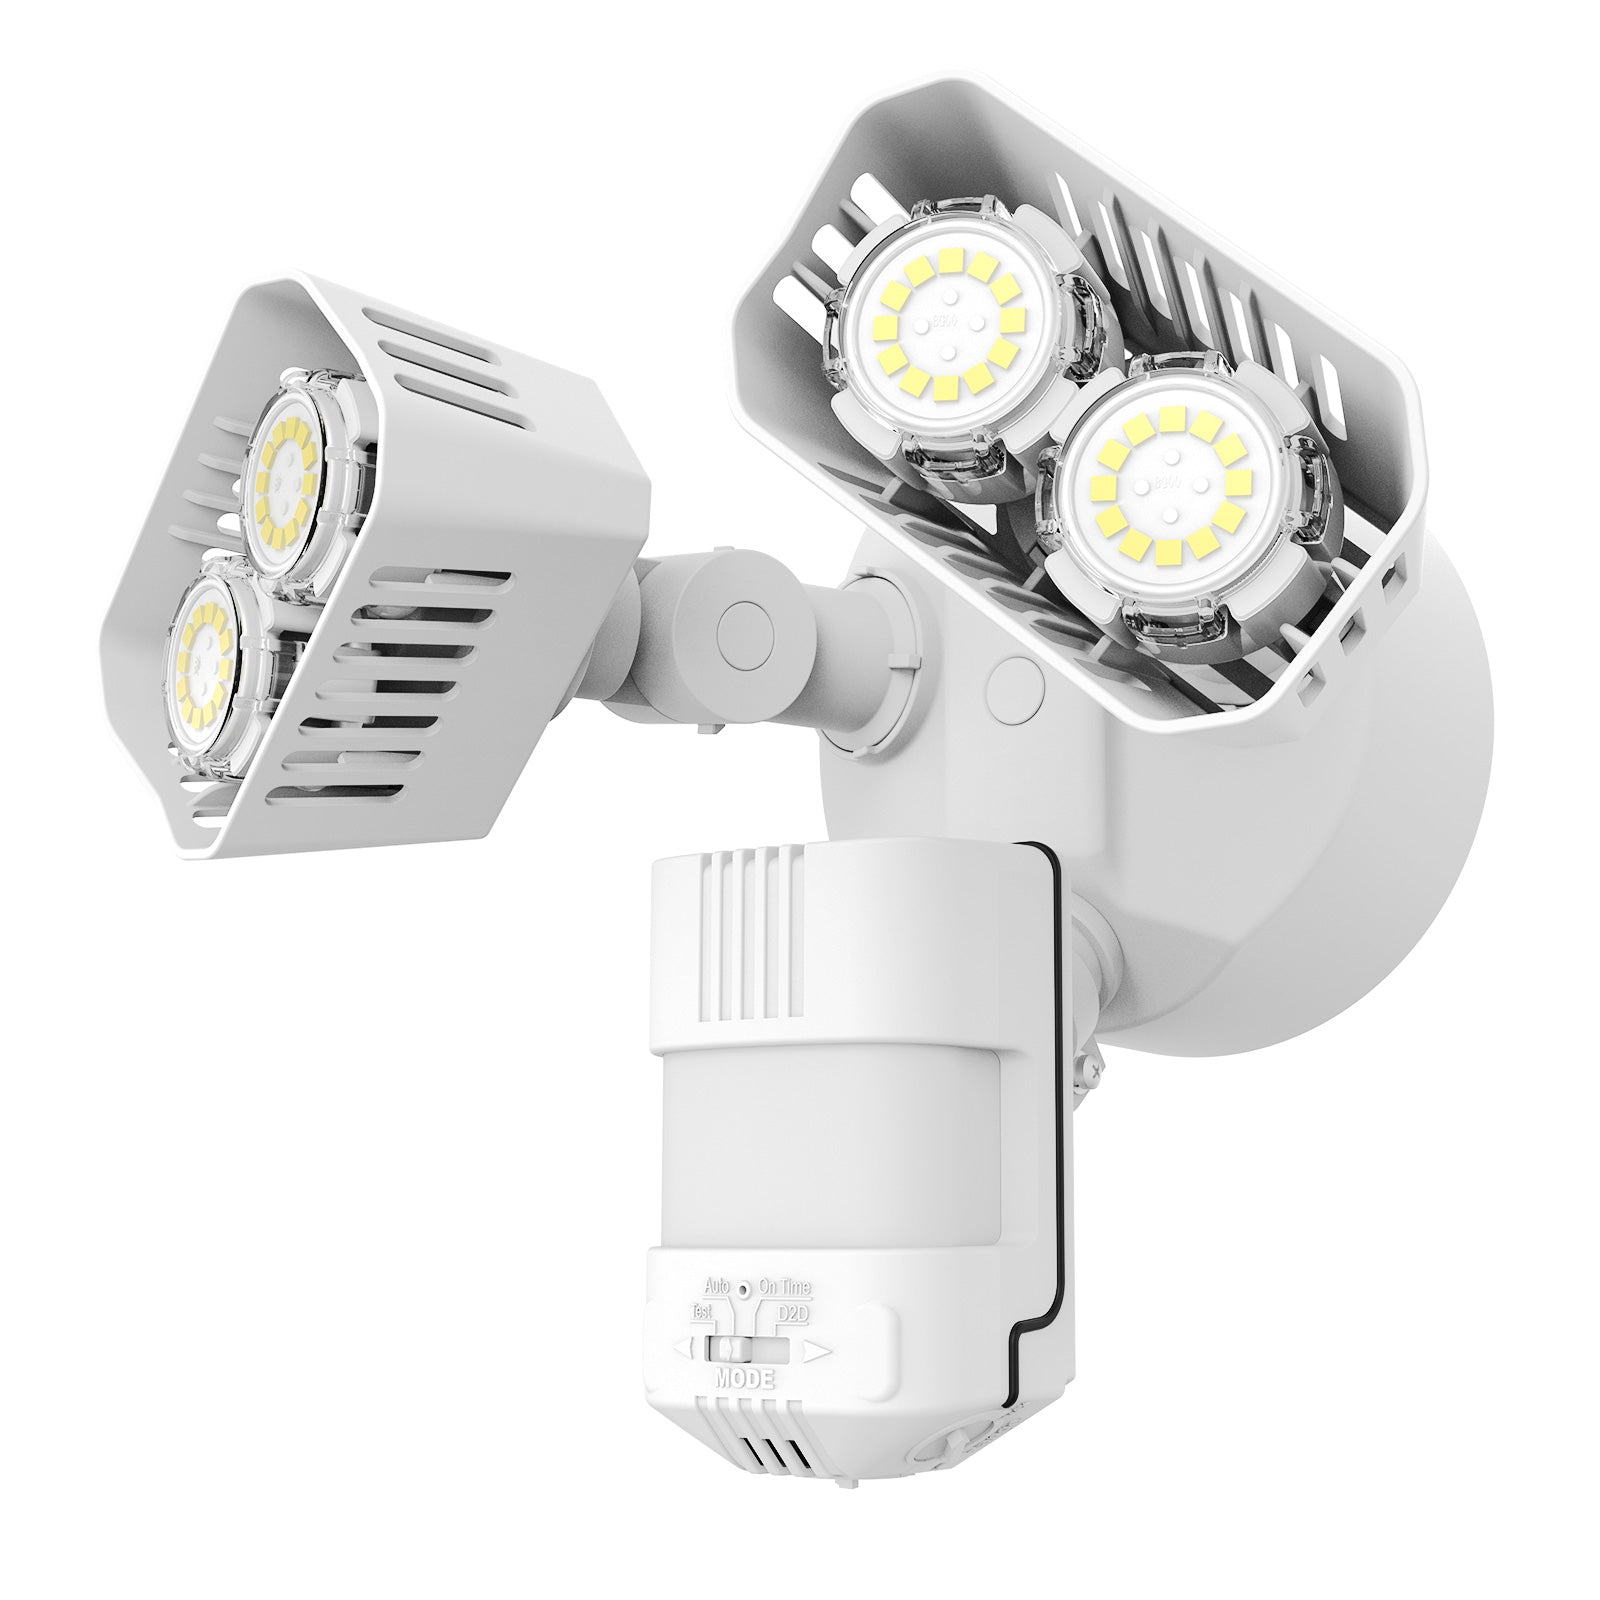 upgraded 28W LED Security Light with the function of Dusk to Dawn & Motion Sensor